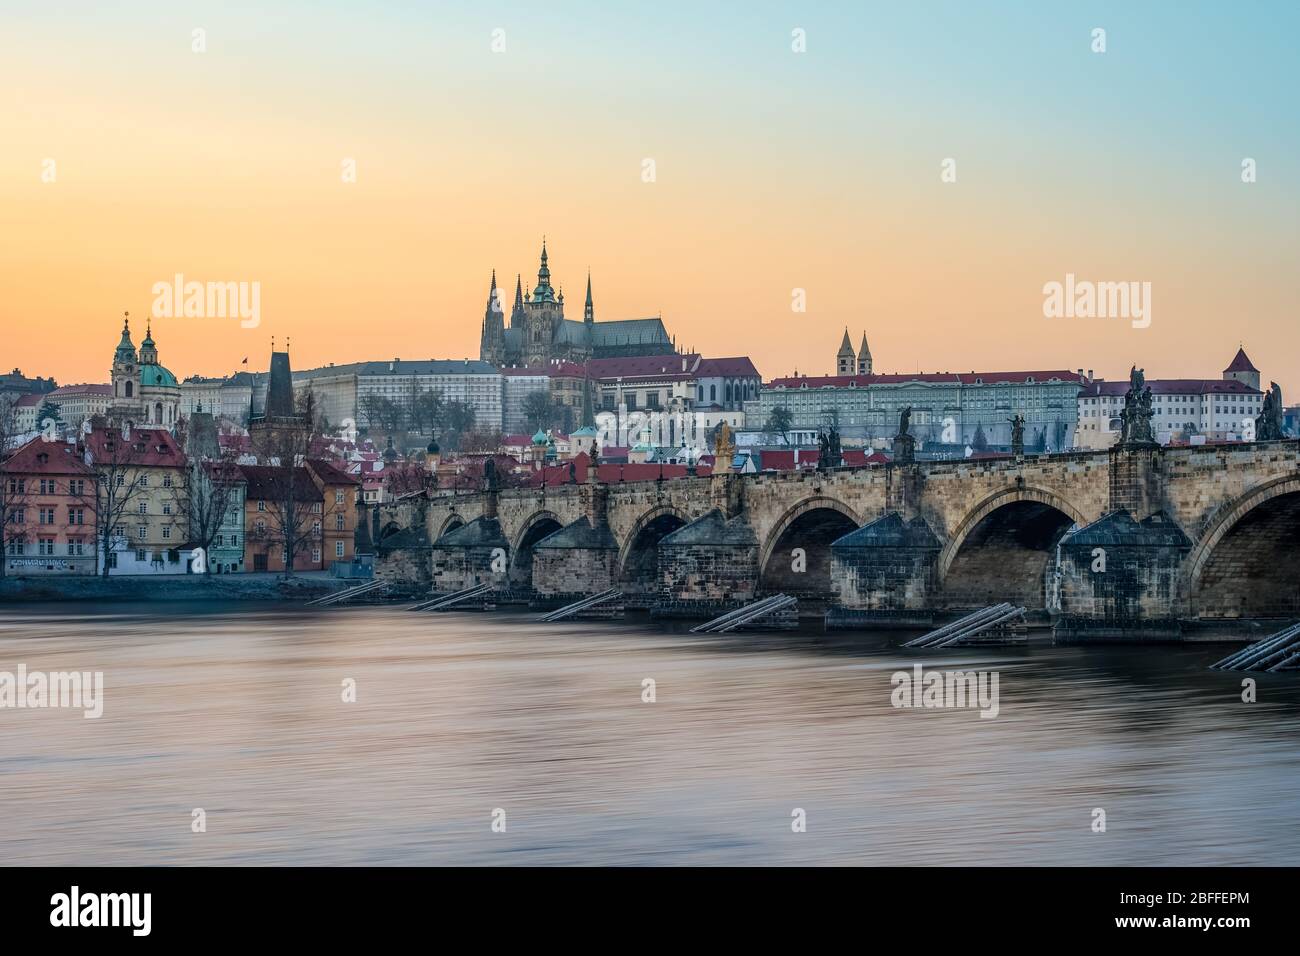 Charles bridge and the Prague castle panorama during the golden hour, Prague, Czech Republic Stock Photo